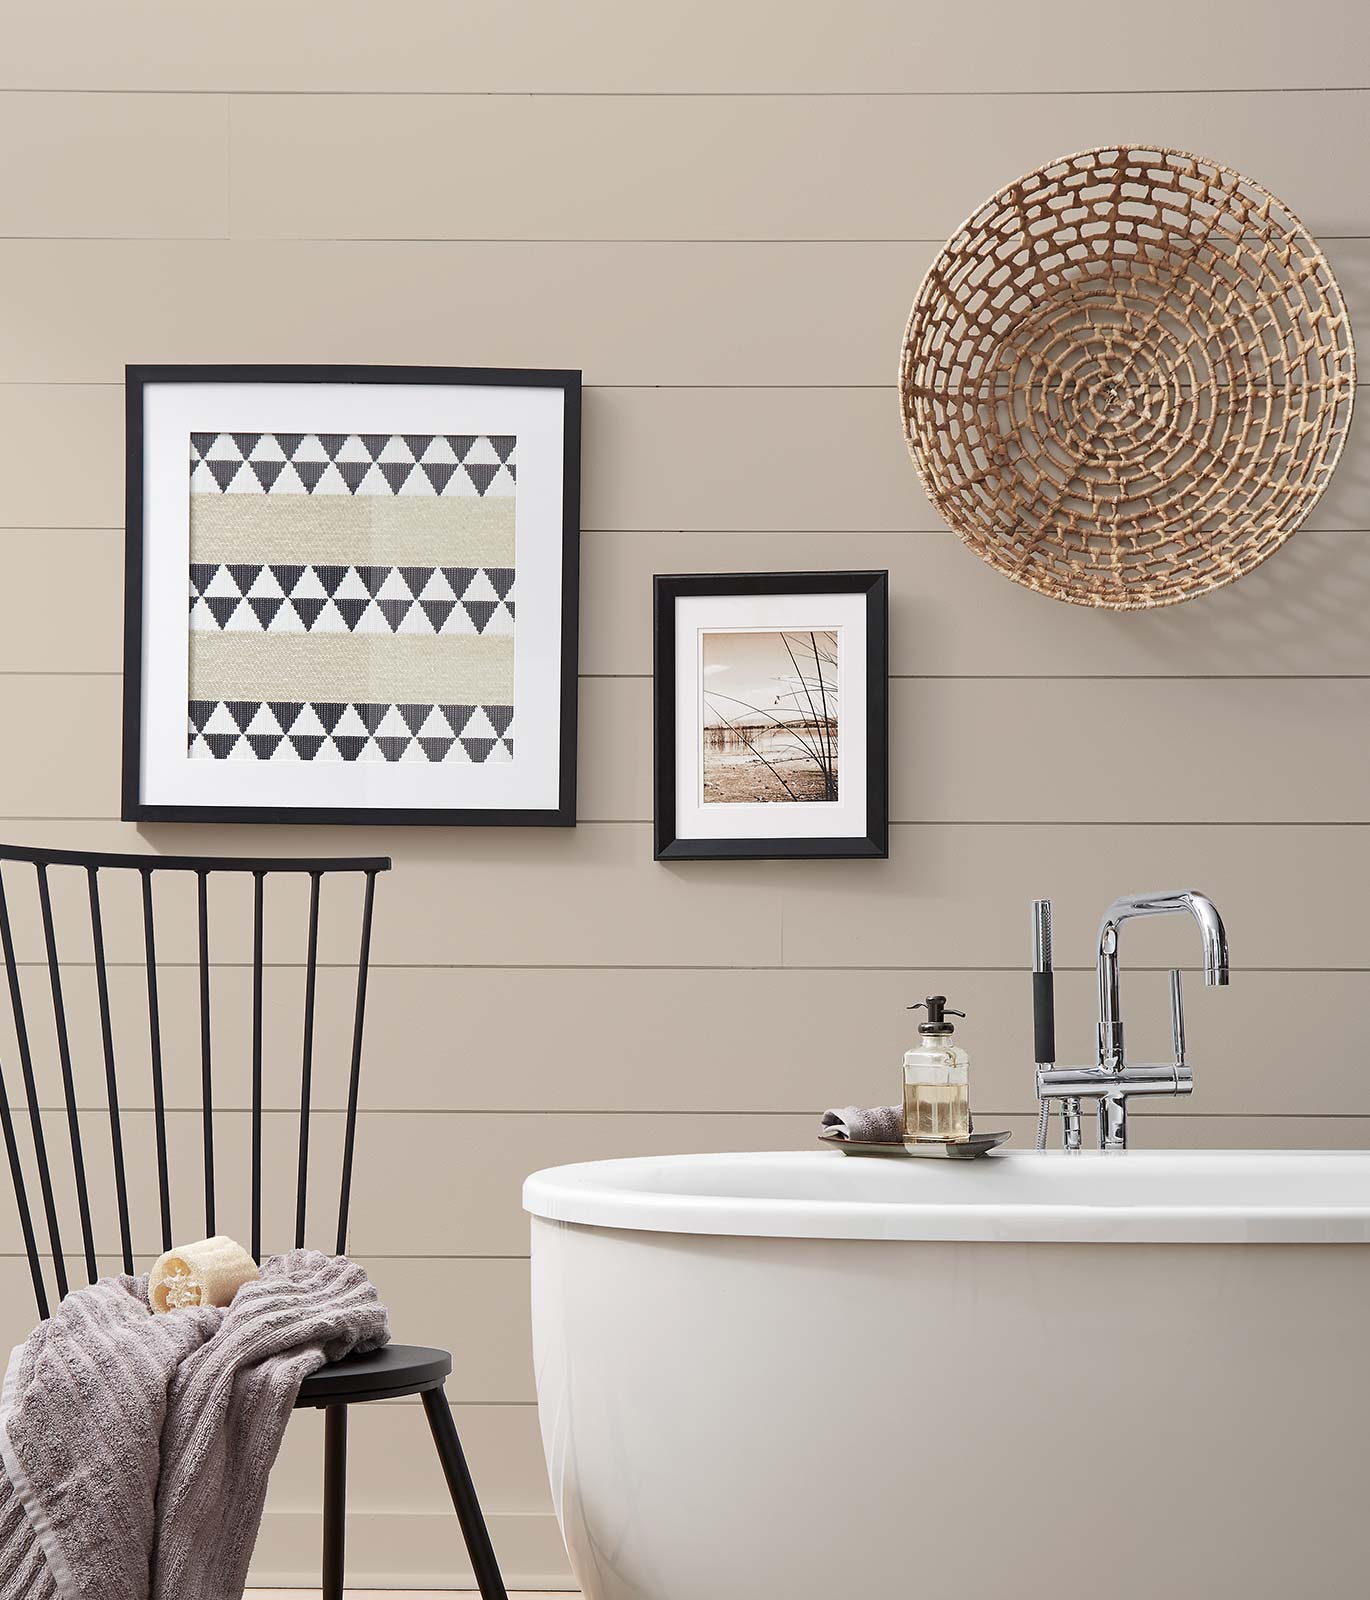 A bathroom painted in a beige color showing corner of a tub with a simple chair and blanket. Décor gives off a casual and comfortable feeling.